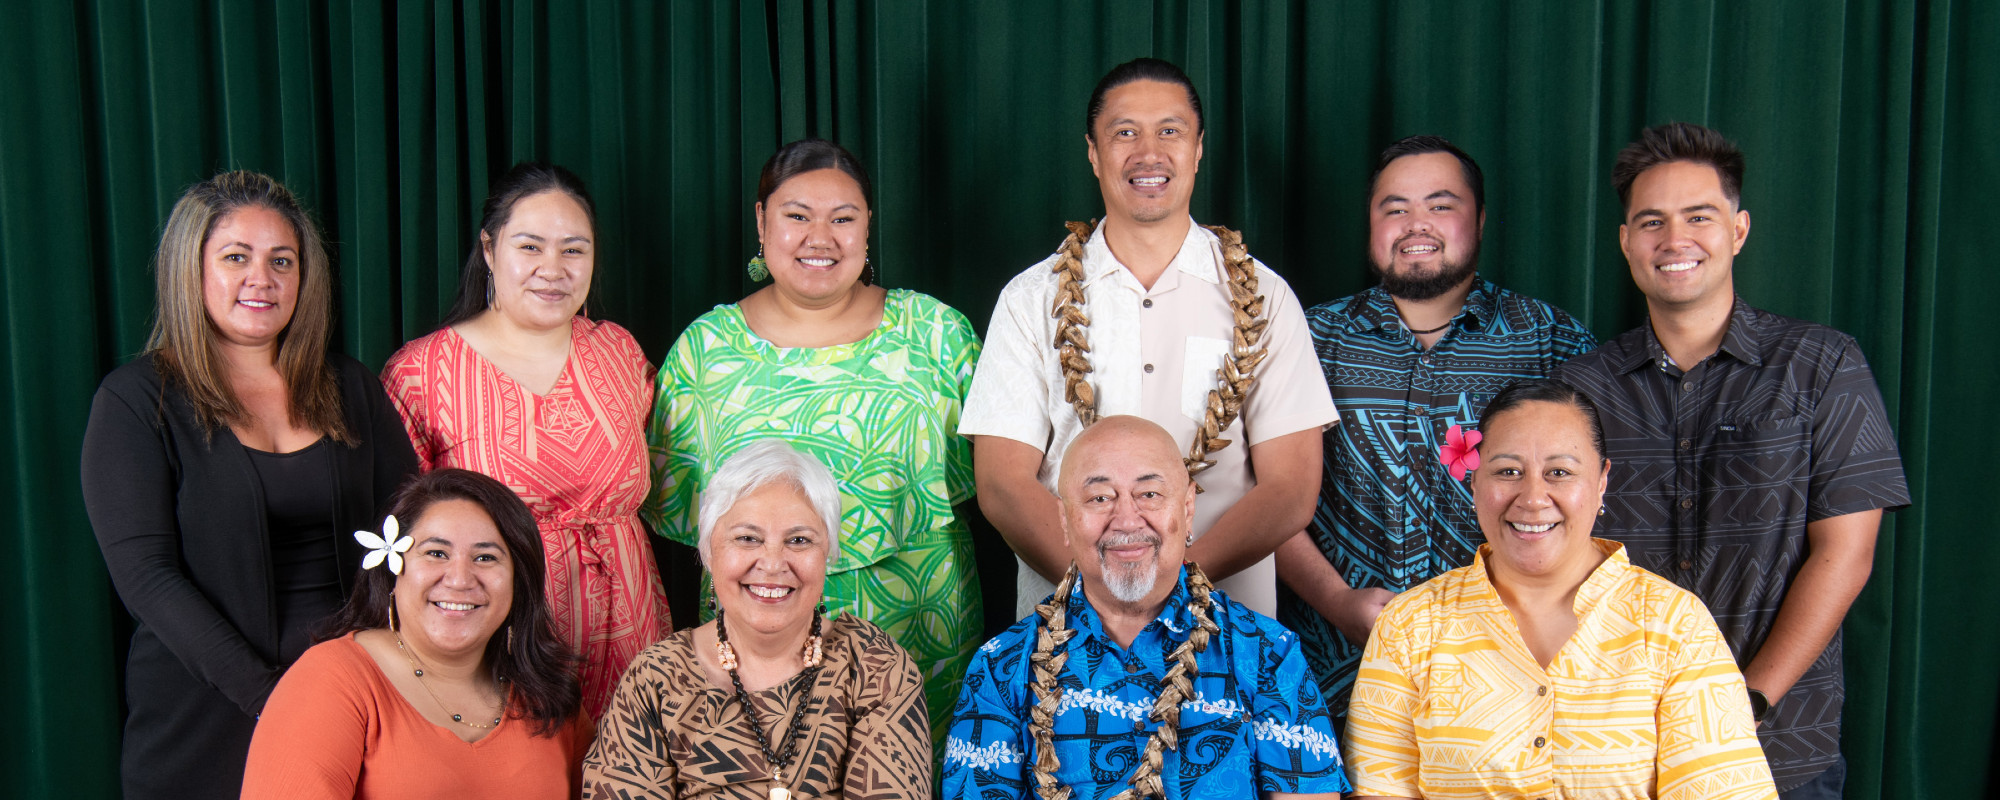 Ten members of the Pasifika team in two rows, smiling for the camera